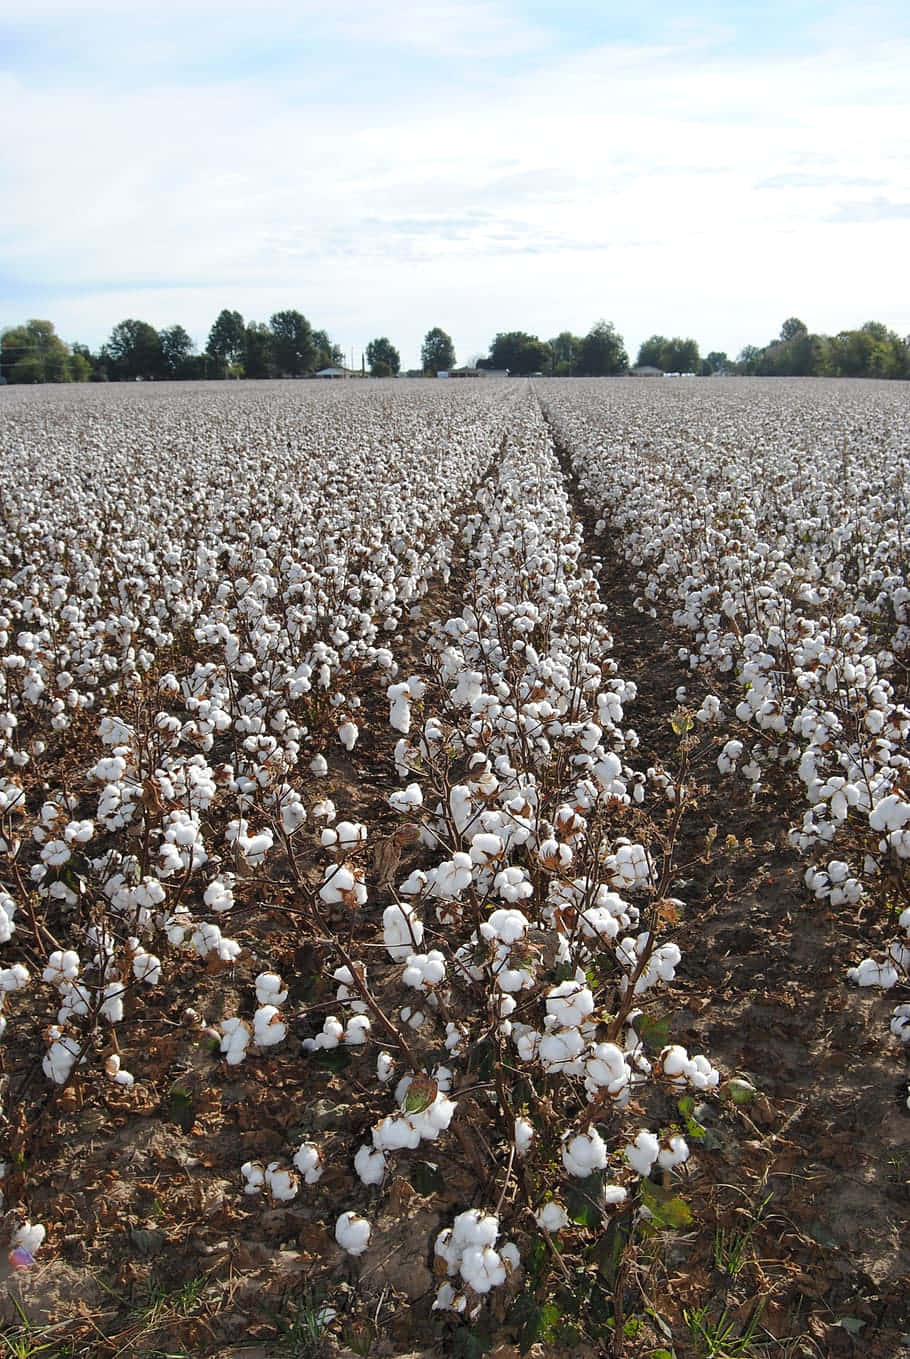 A peaceful scene of a cotton field surrounded by trees